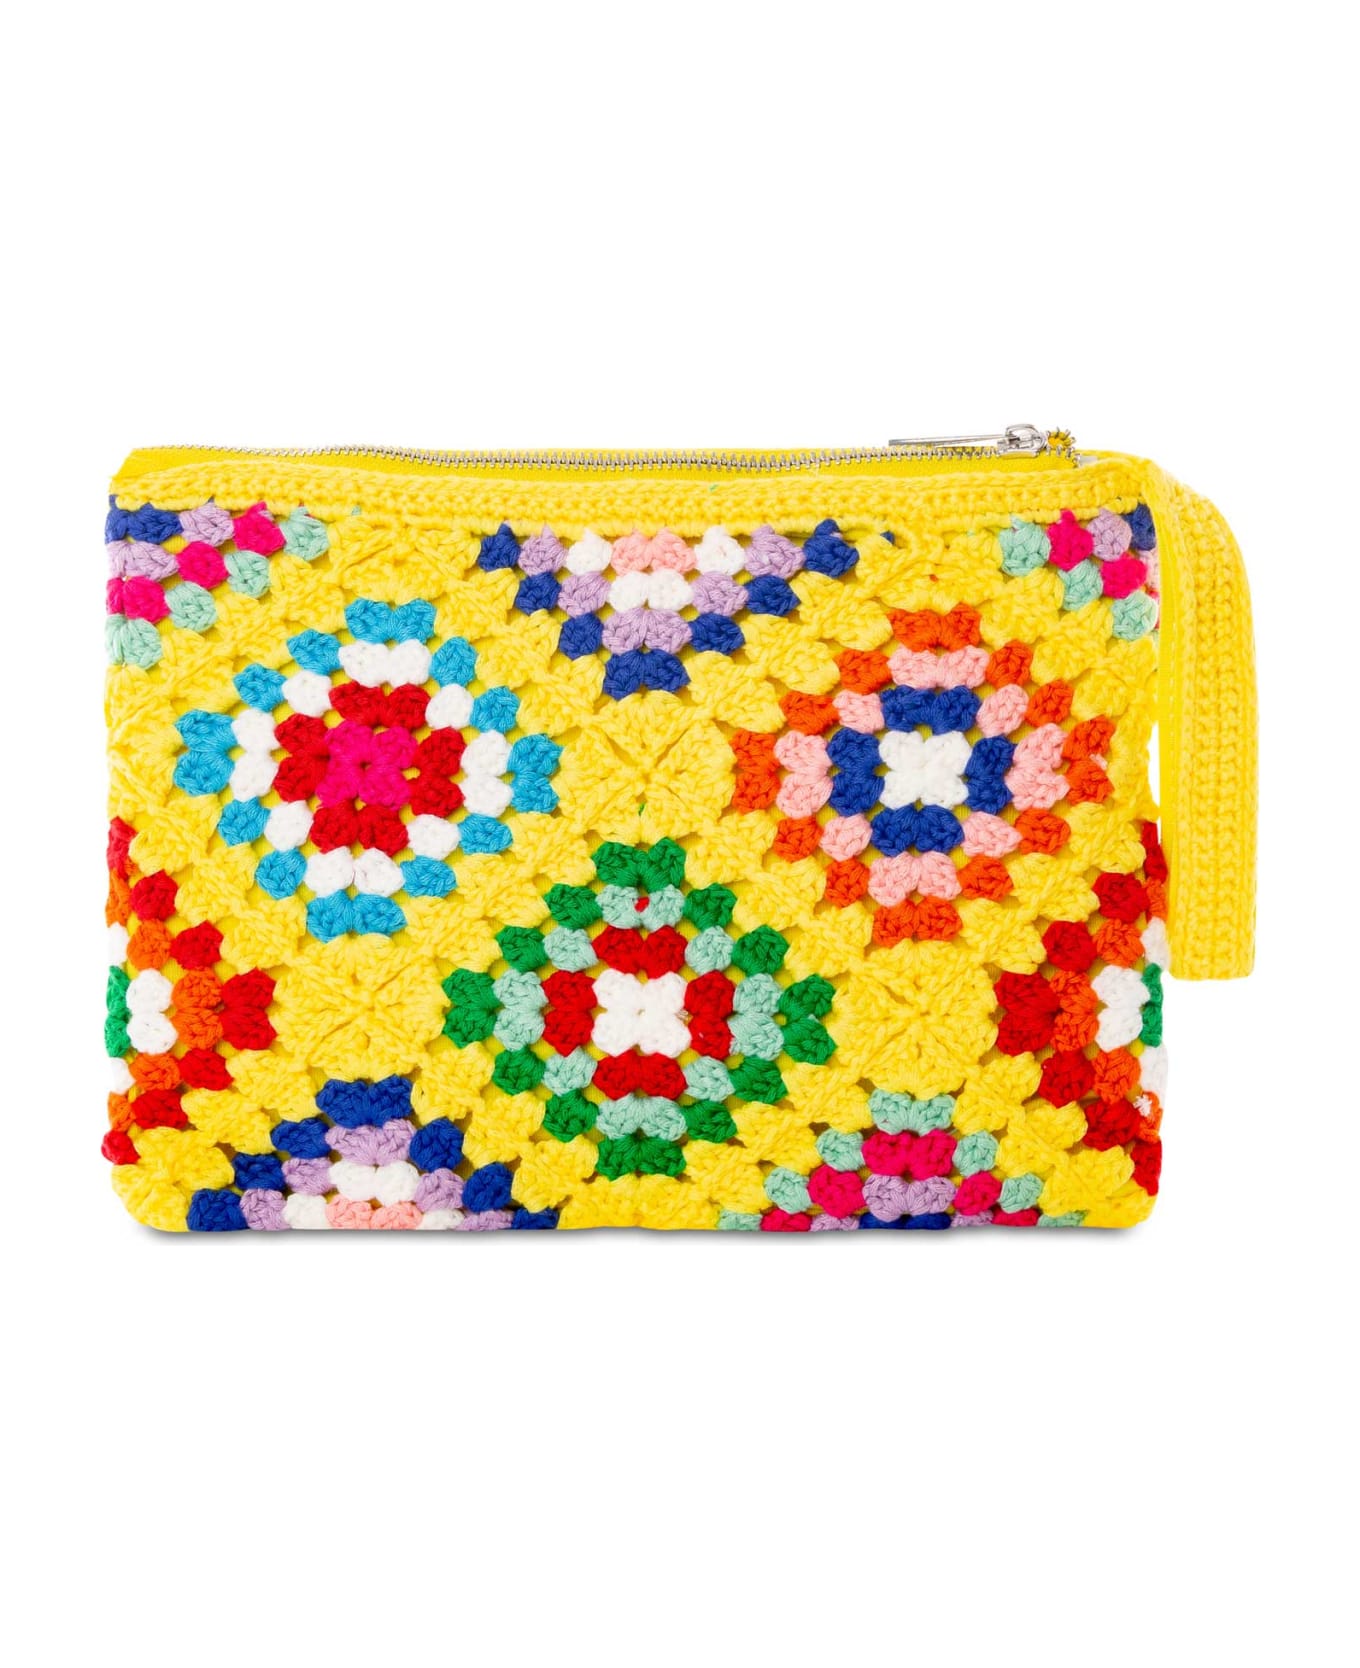 MC2 Saint Barth Parisienne Yellow Crochet Pouch Bag With Saint Barth Embroidery - YELLOW トラベルバッグ